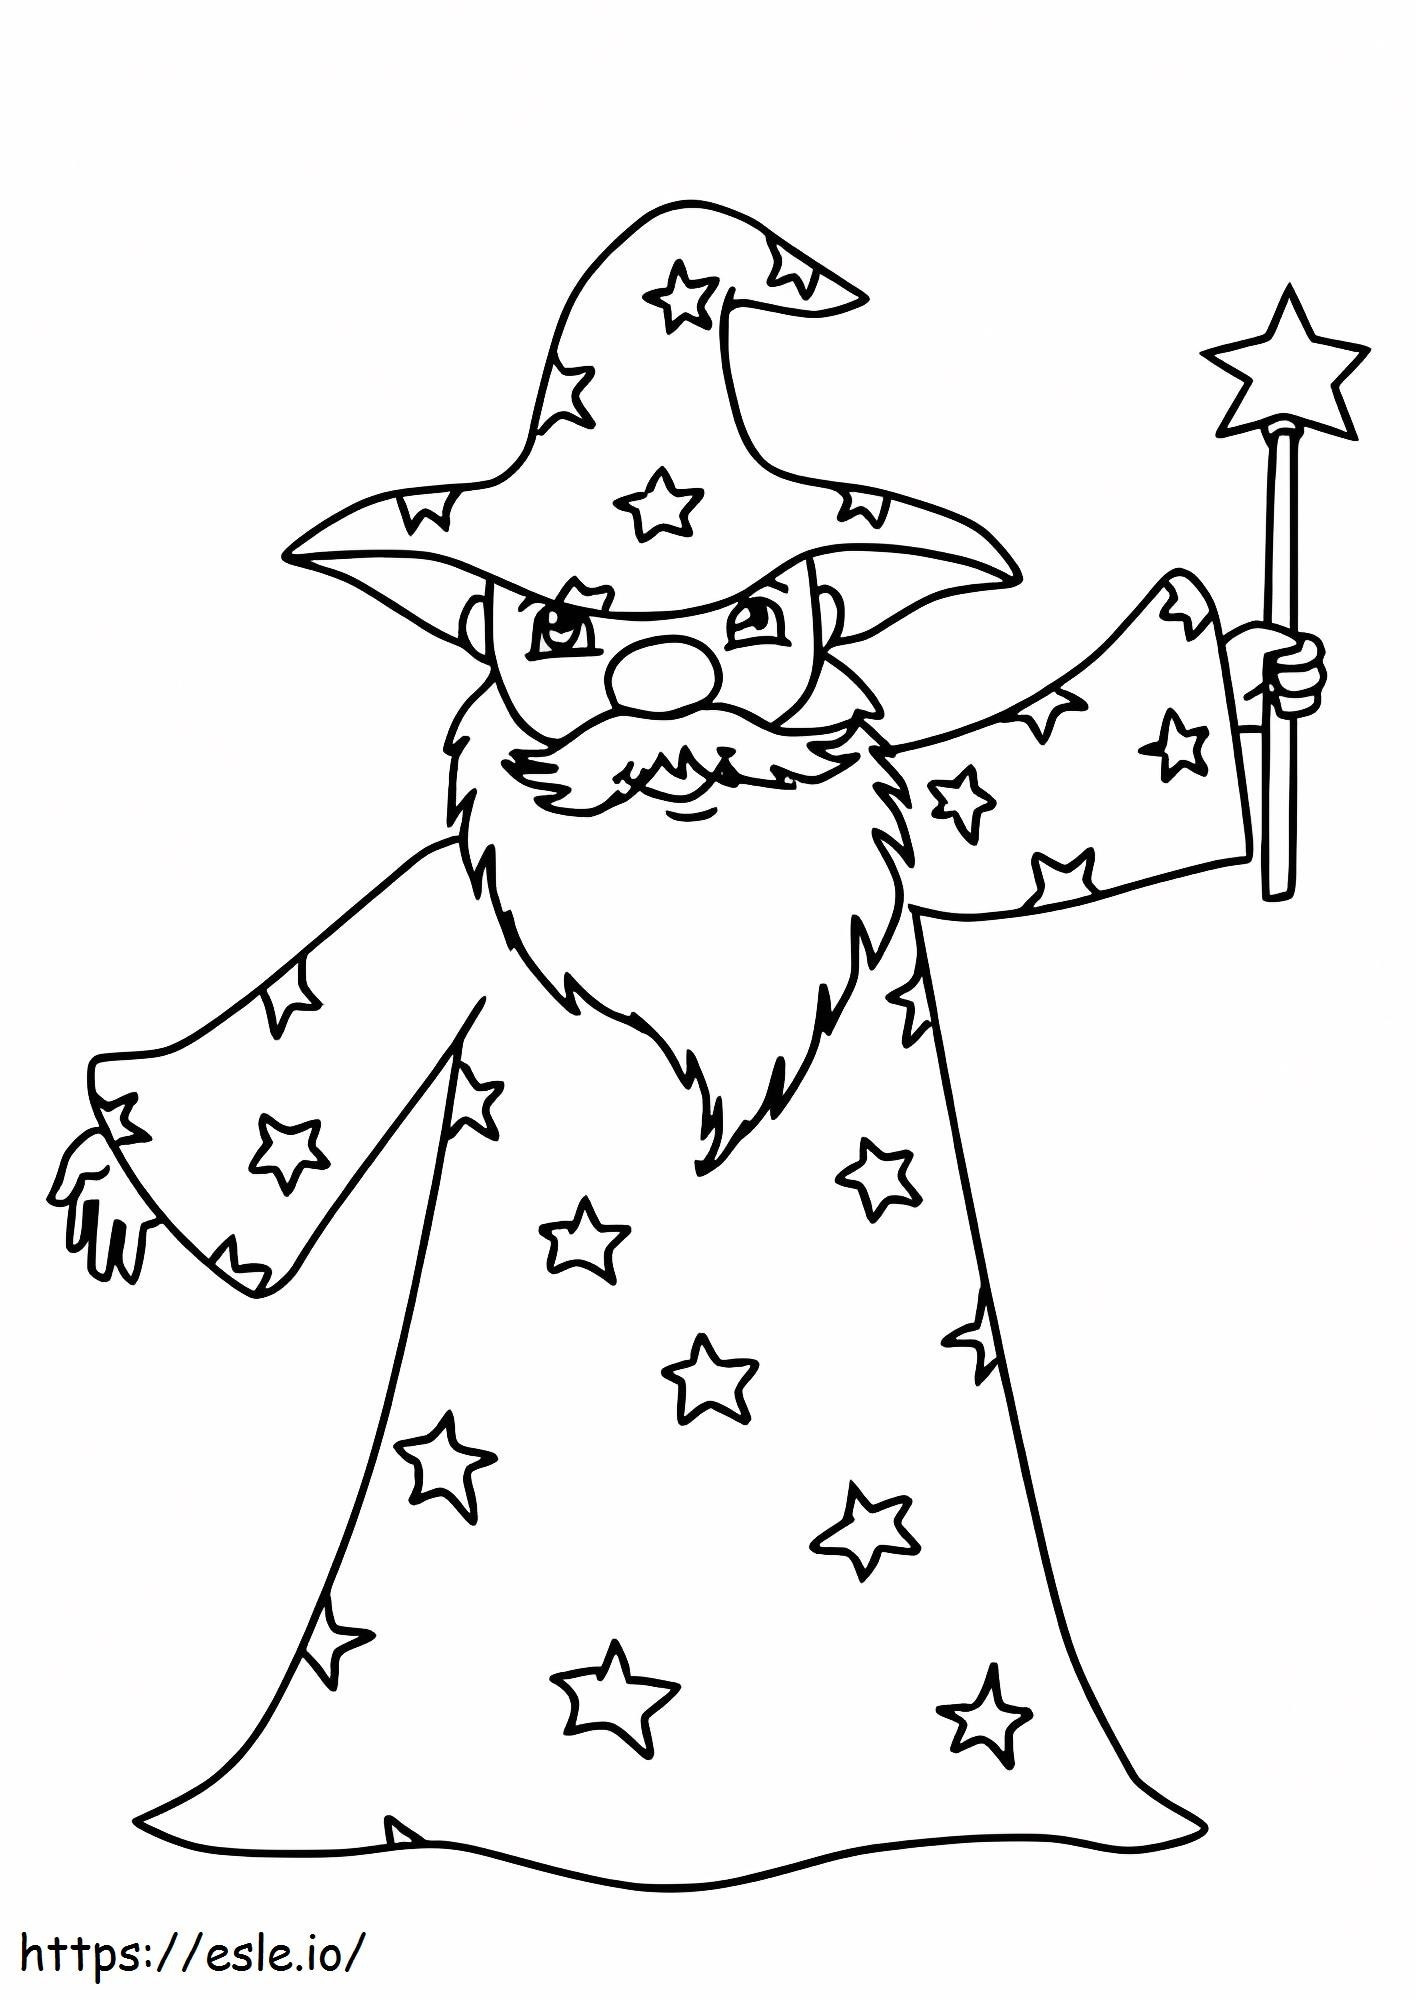 Old Wizard And Star coloring page